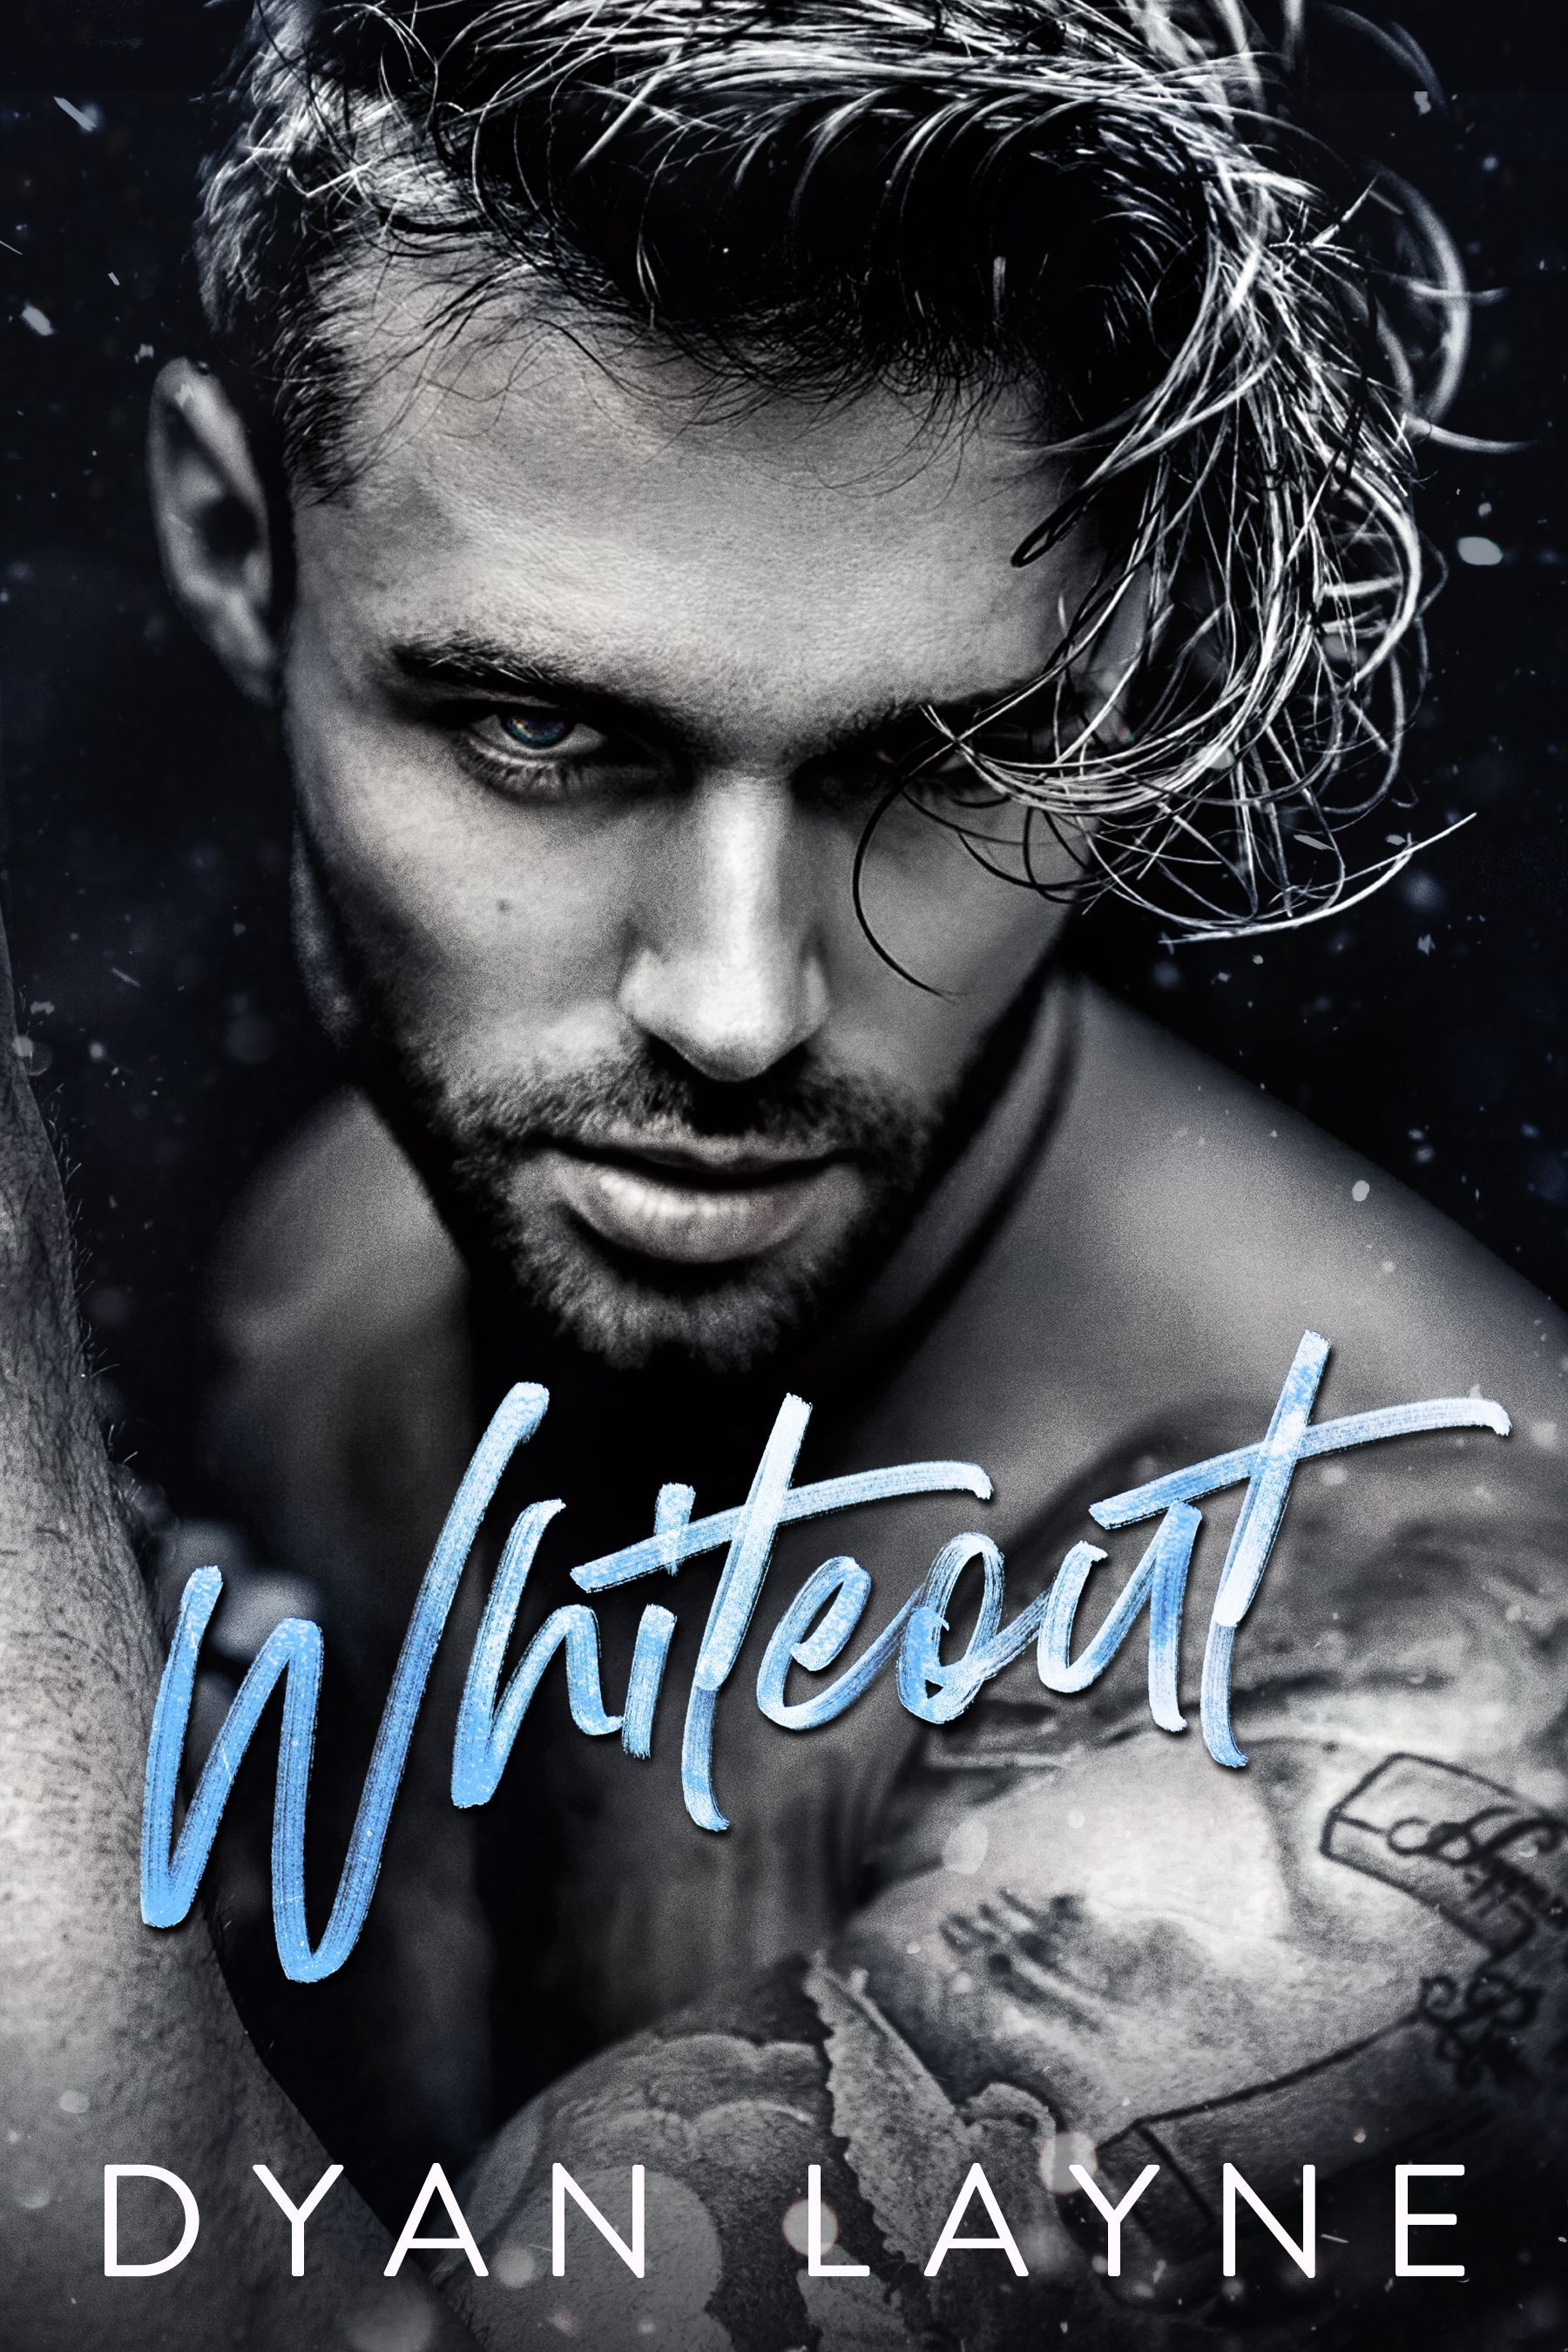 A man with a tattoo on his arm is on the cover of a book called whiteout by dyan layne